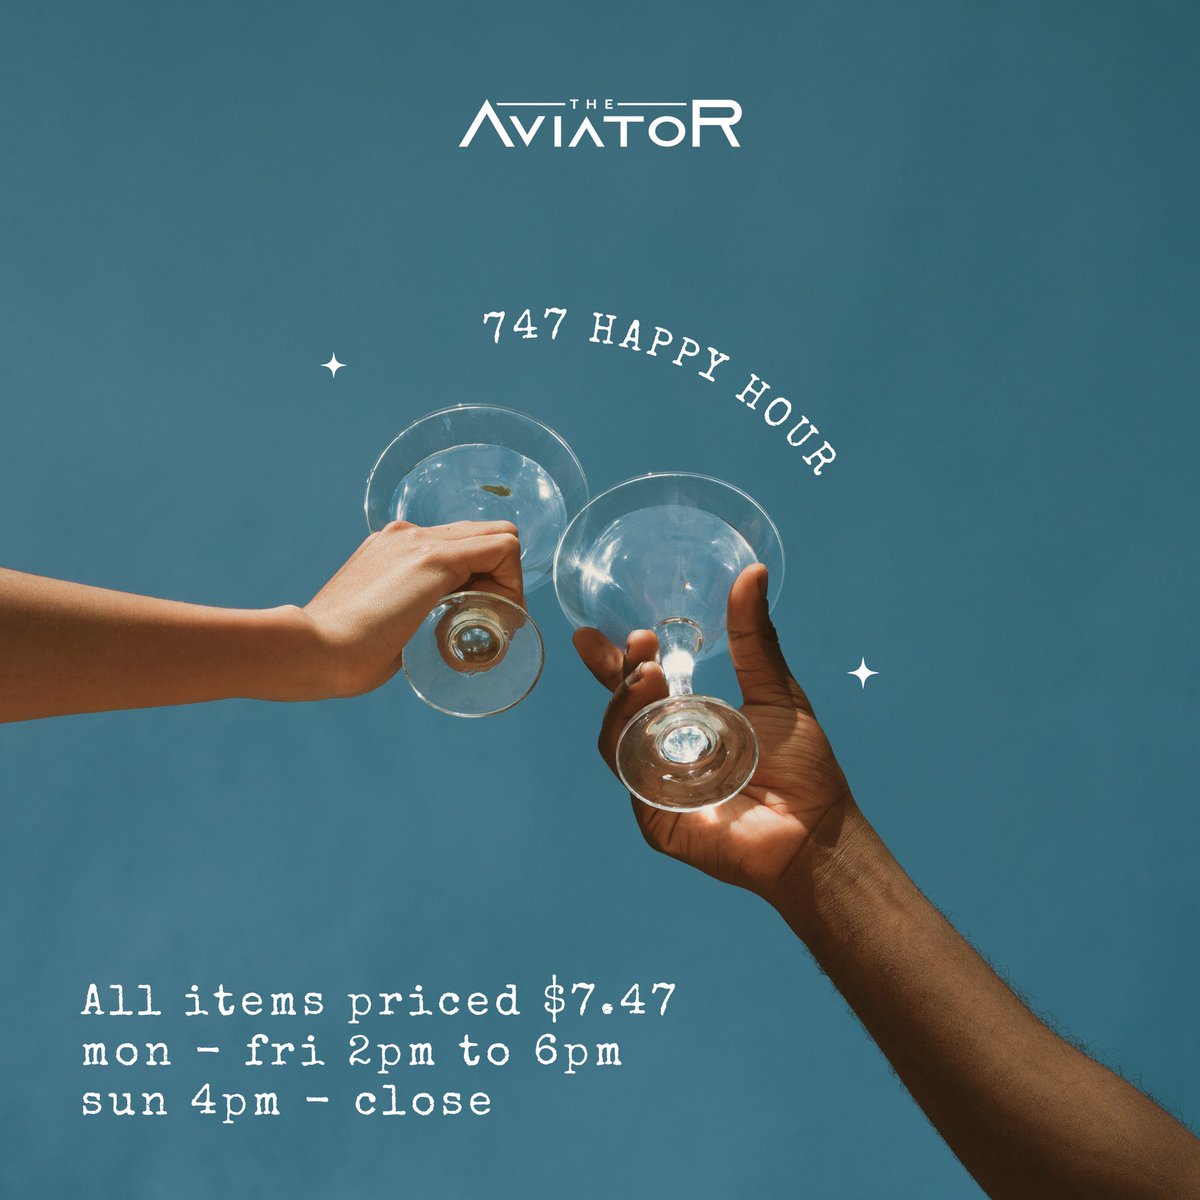 ✈️ 747 HAPPY HOUR ✈️ ALL Happy Hour menu items are $7.47! YES… ONLY $7.47! This menu includes both food + drinks! 🥂 To see the full menu, please visit: aviatorpubcleveland.com/menu/happy-hou…